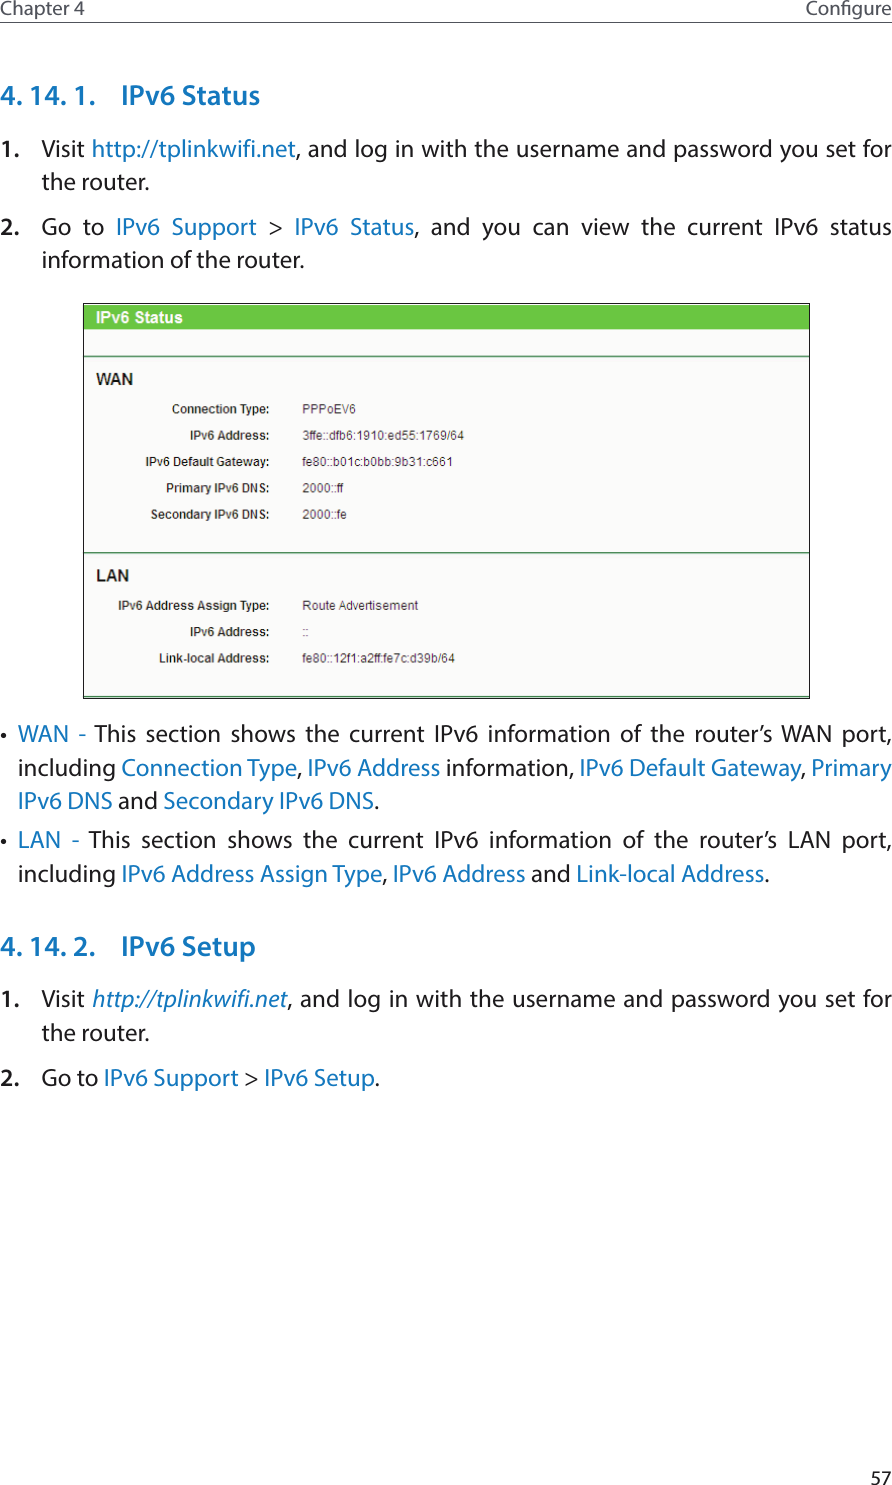 57Chapter 4 Congure4. 14. 1.  IPv6 Status1.  Visit http://tplinkwifi.net, and log in with the username and password you set for the router.2.  Go to IPv6 Support &gt; IPv6 Status, and you can view the current IPv6 status information of the router.•  WAN - This section shows the current IPv6 information of the router’s WAN port, including Connection Type, IPv6 Address information, IPv6 Default Gateway, Primary IPv6 DNS and Secondary IPv6 DNS.•  LAN - This section shows the current IPv6 information of the router’s LAN port, including IPv6 Address Assign Type, IPv6 Address and Link-local Address.4. 14. 2.  IPv6 Setup1.  Visit http://tplinkwifi.net, and log in with the username and password you set for the router.2.  Go to IPv6 Support &gt; IPv6 Setup.